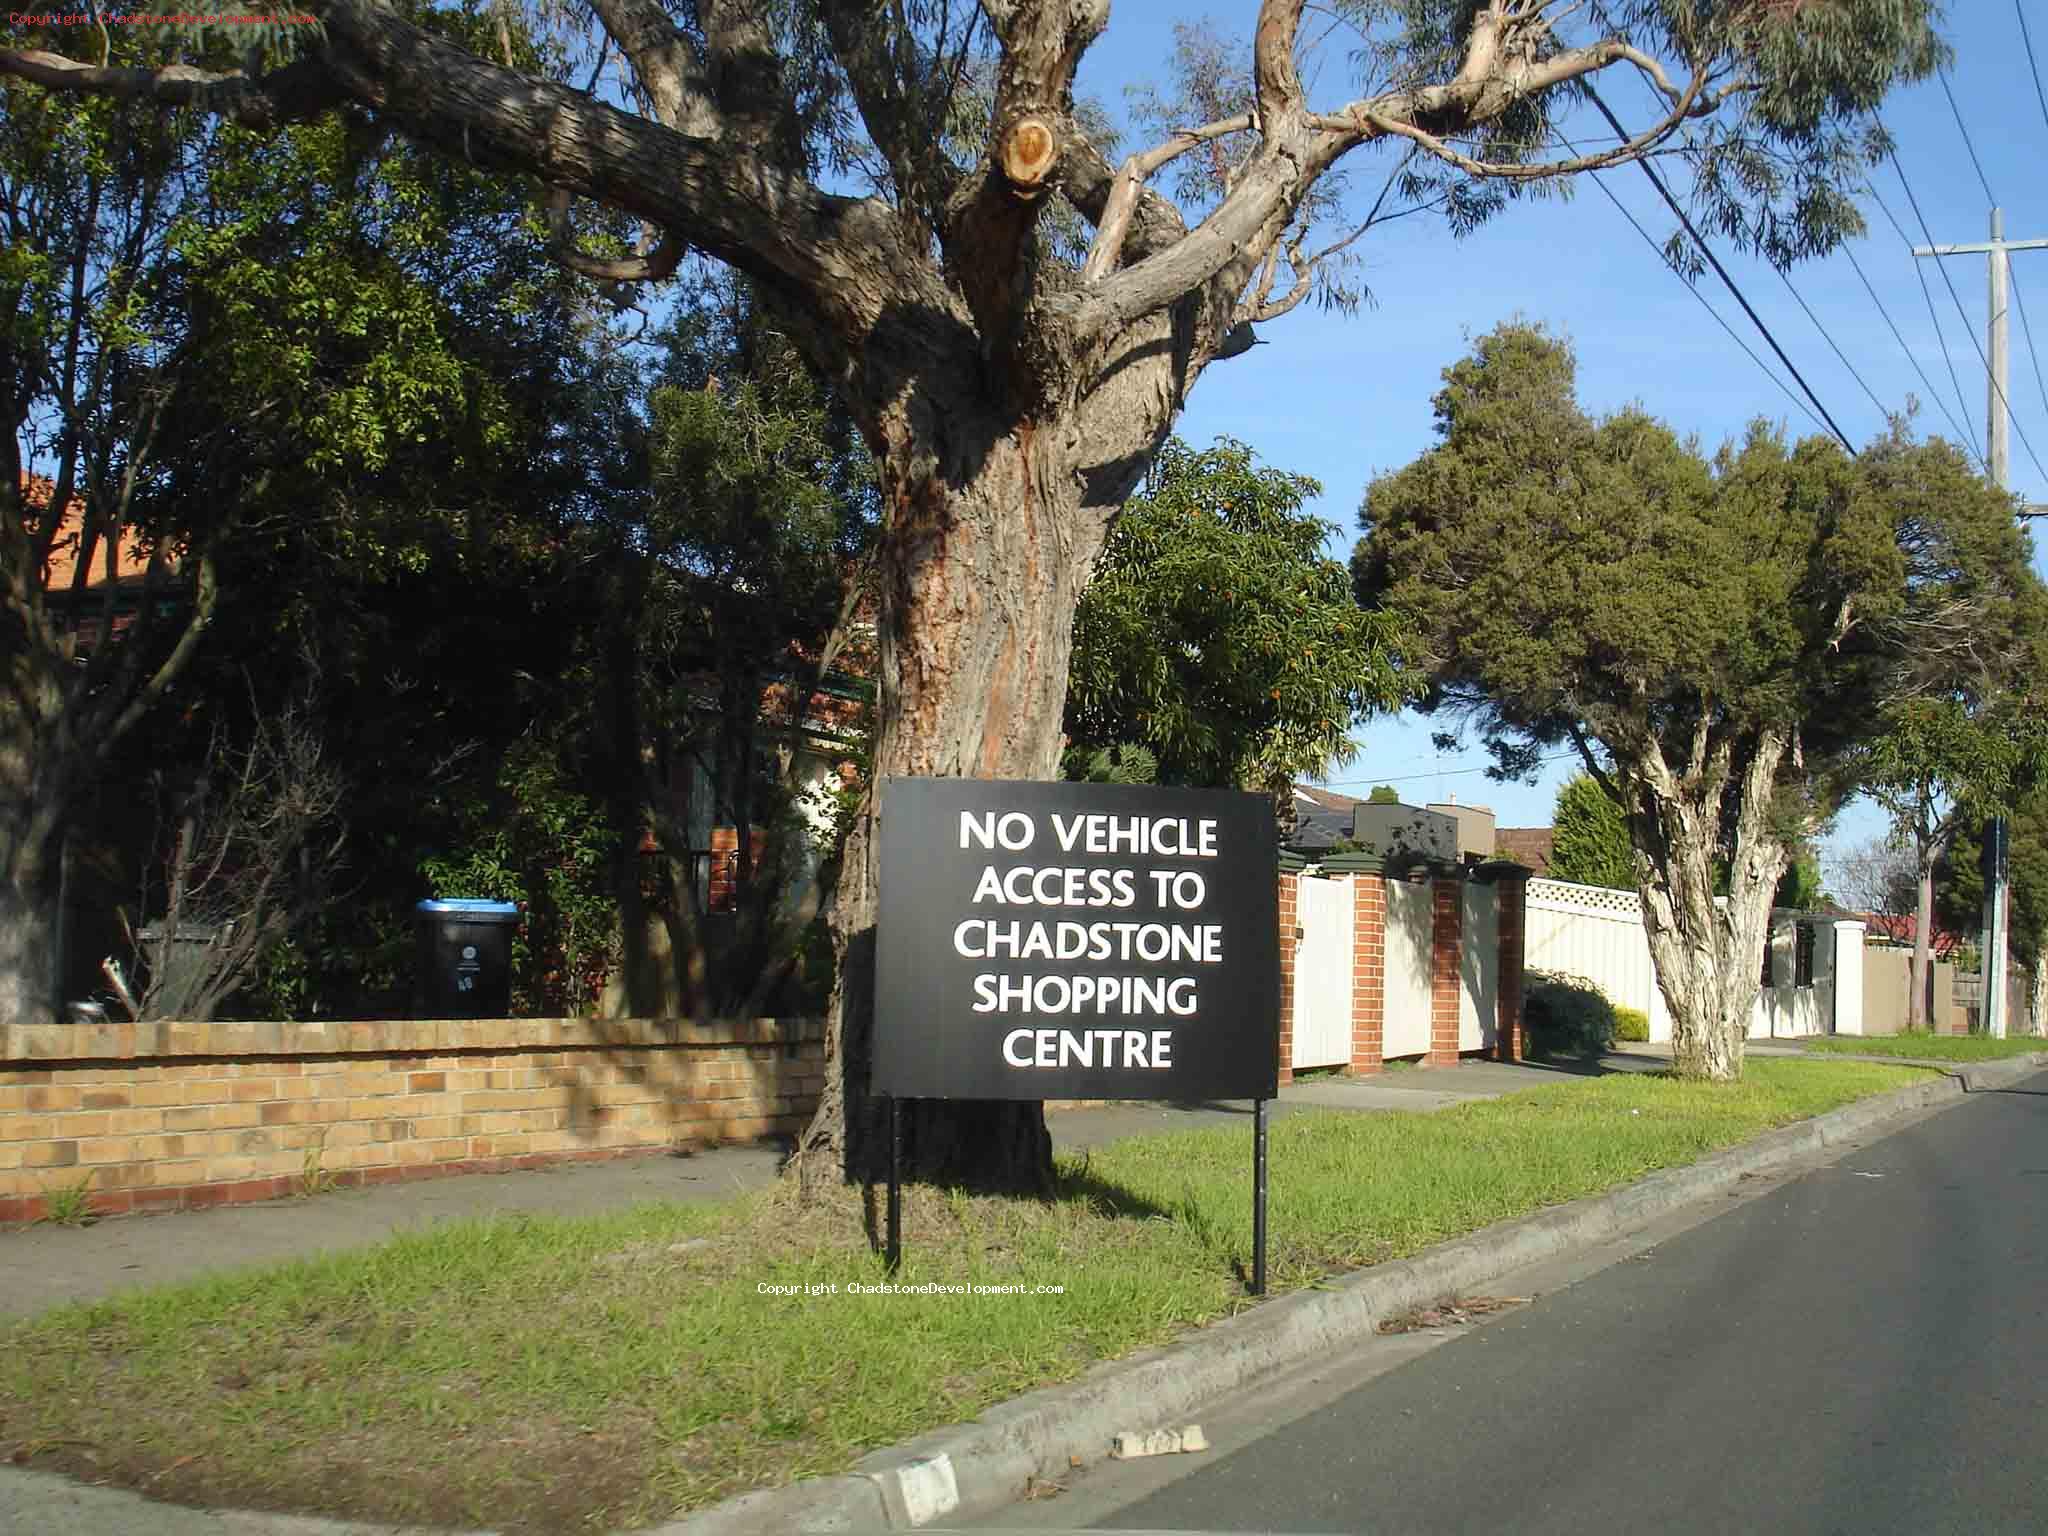 Capon St - No Vehicle access to shopping centre - Chadstone Development Discussions